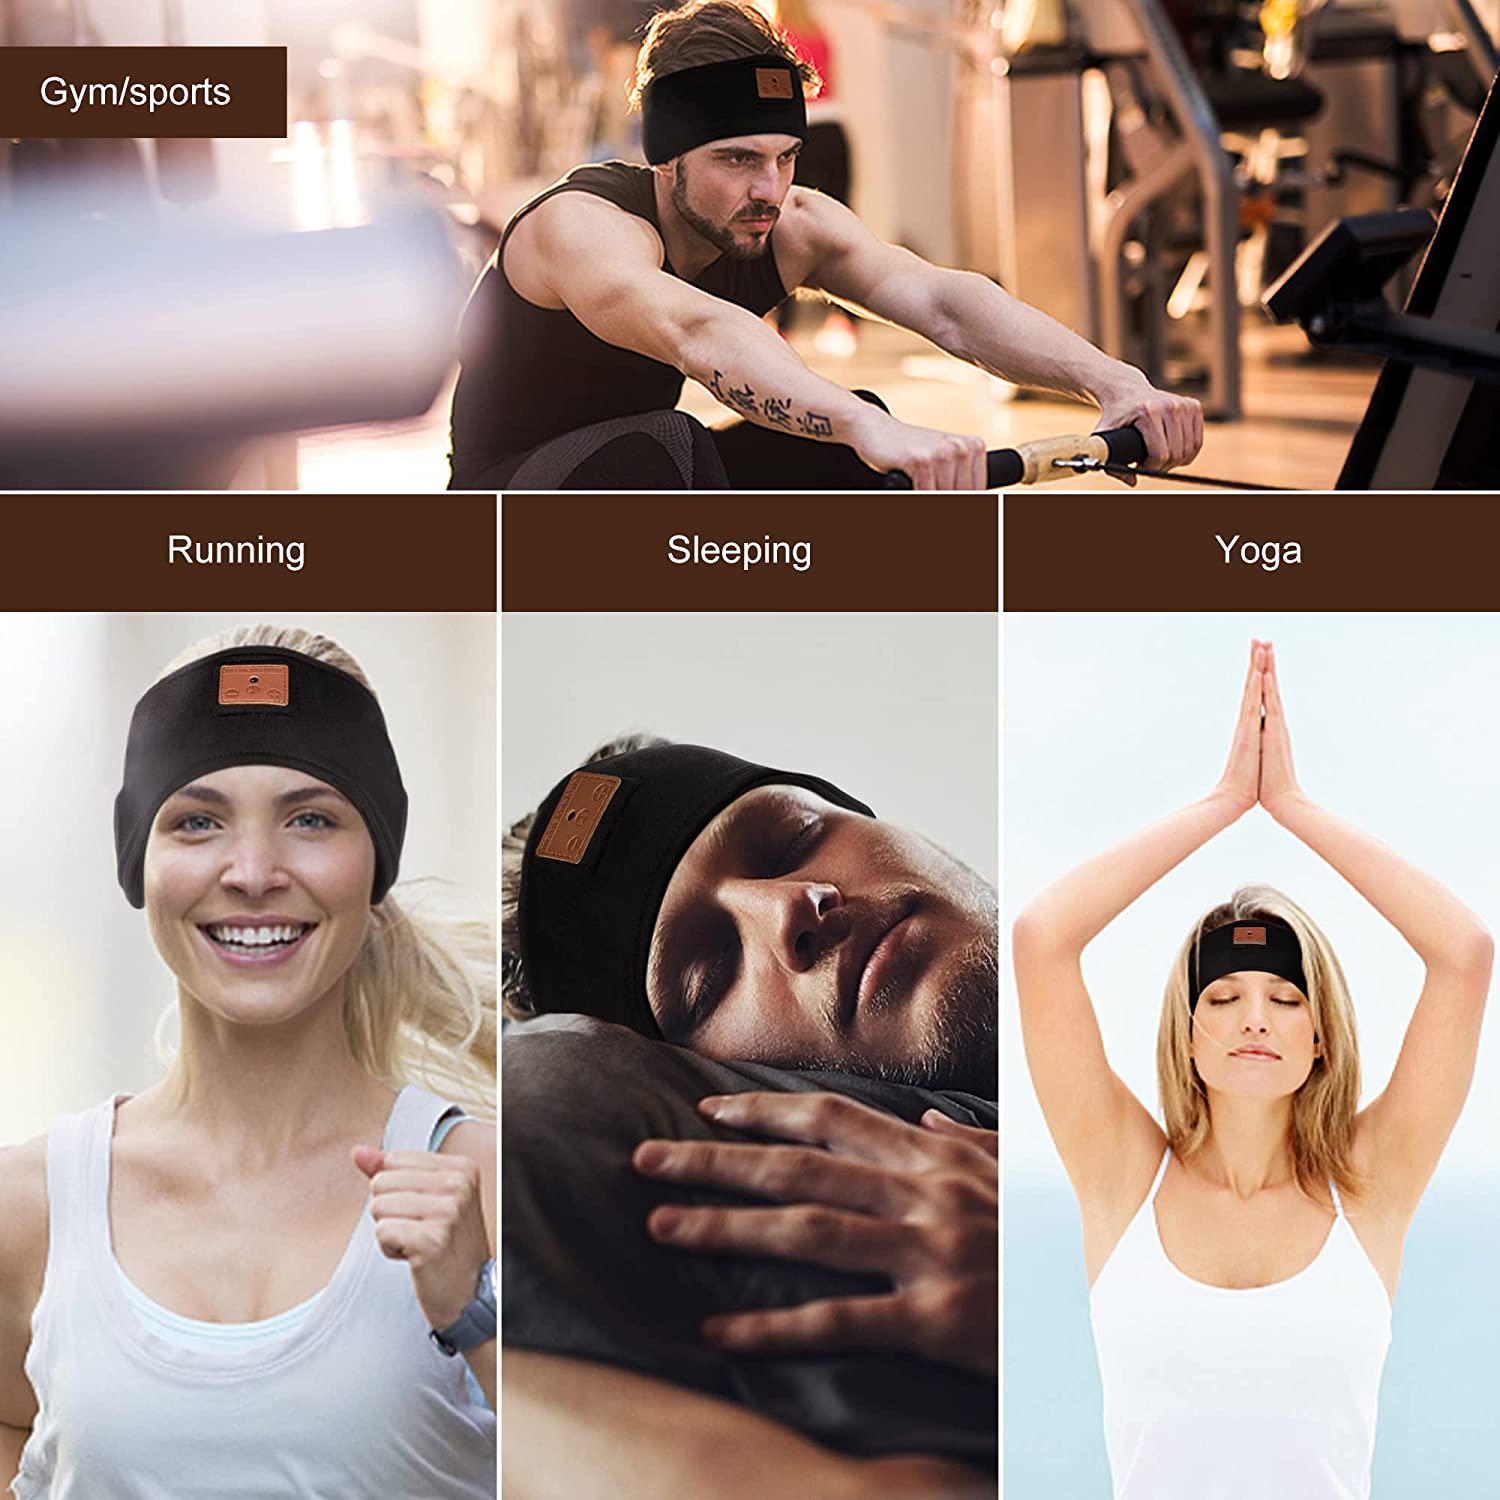 MD, MD Sleep Headphones - Adjustable Sports Headband Headphones - Sleep Mask for Meditation, Relaxation, and Sleeping with Wireless Bluetooth HD Stereo Speaker for Men, Women, Gym, Running and Travelling